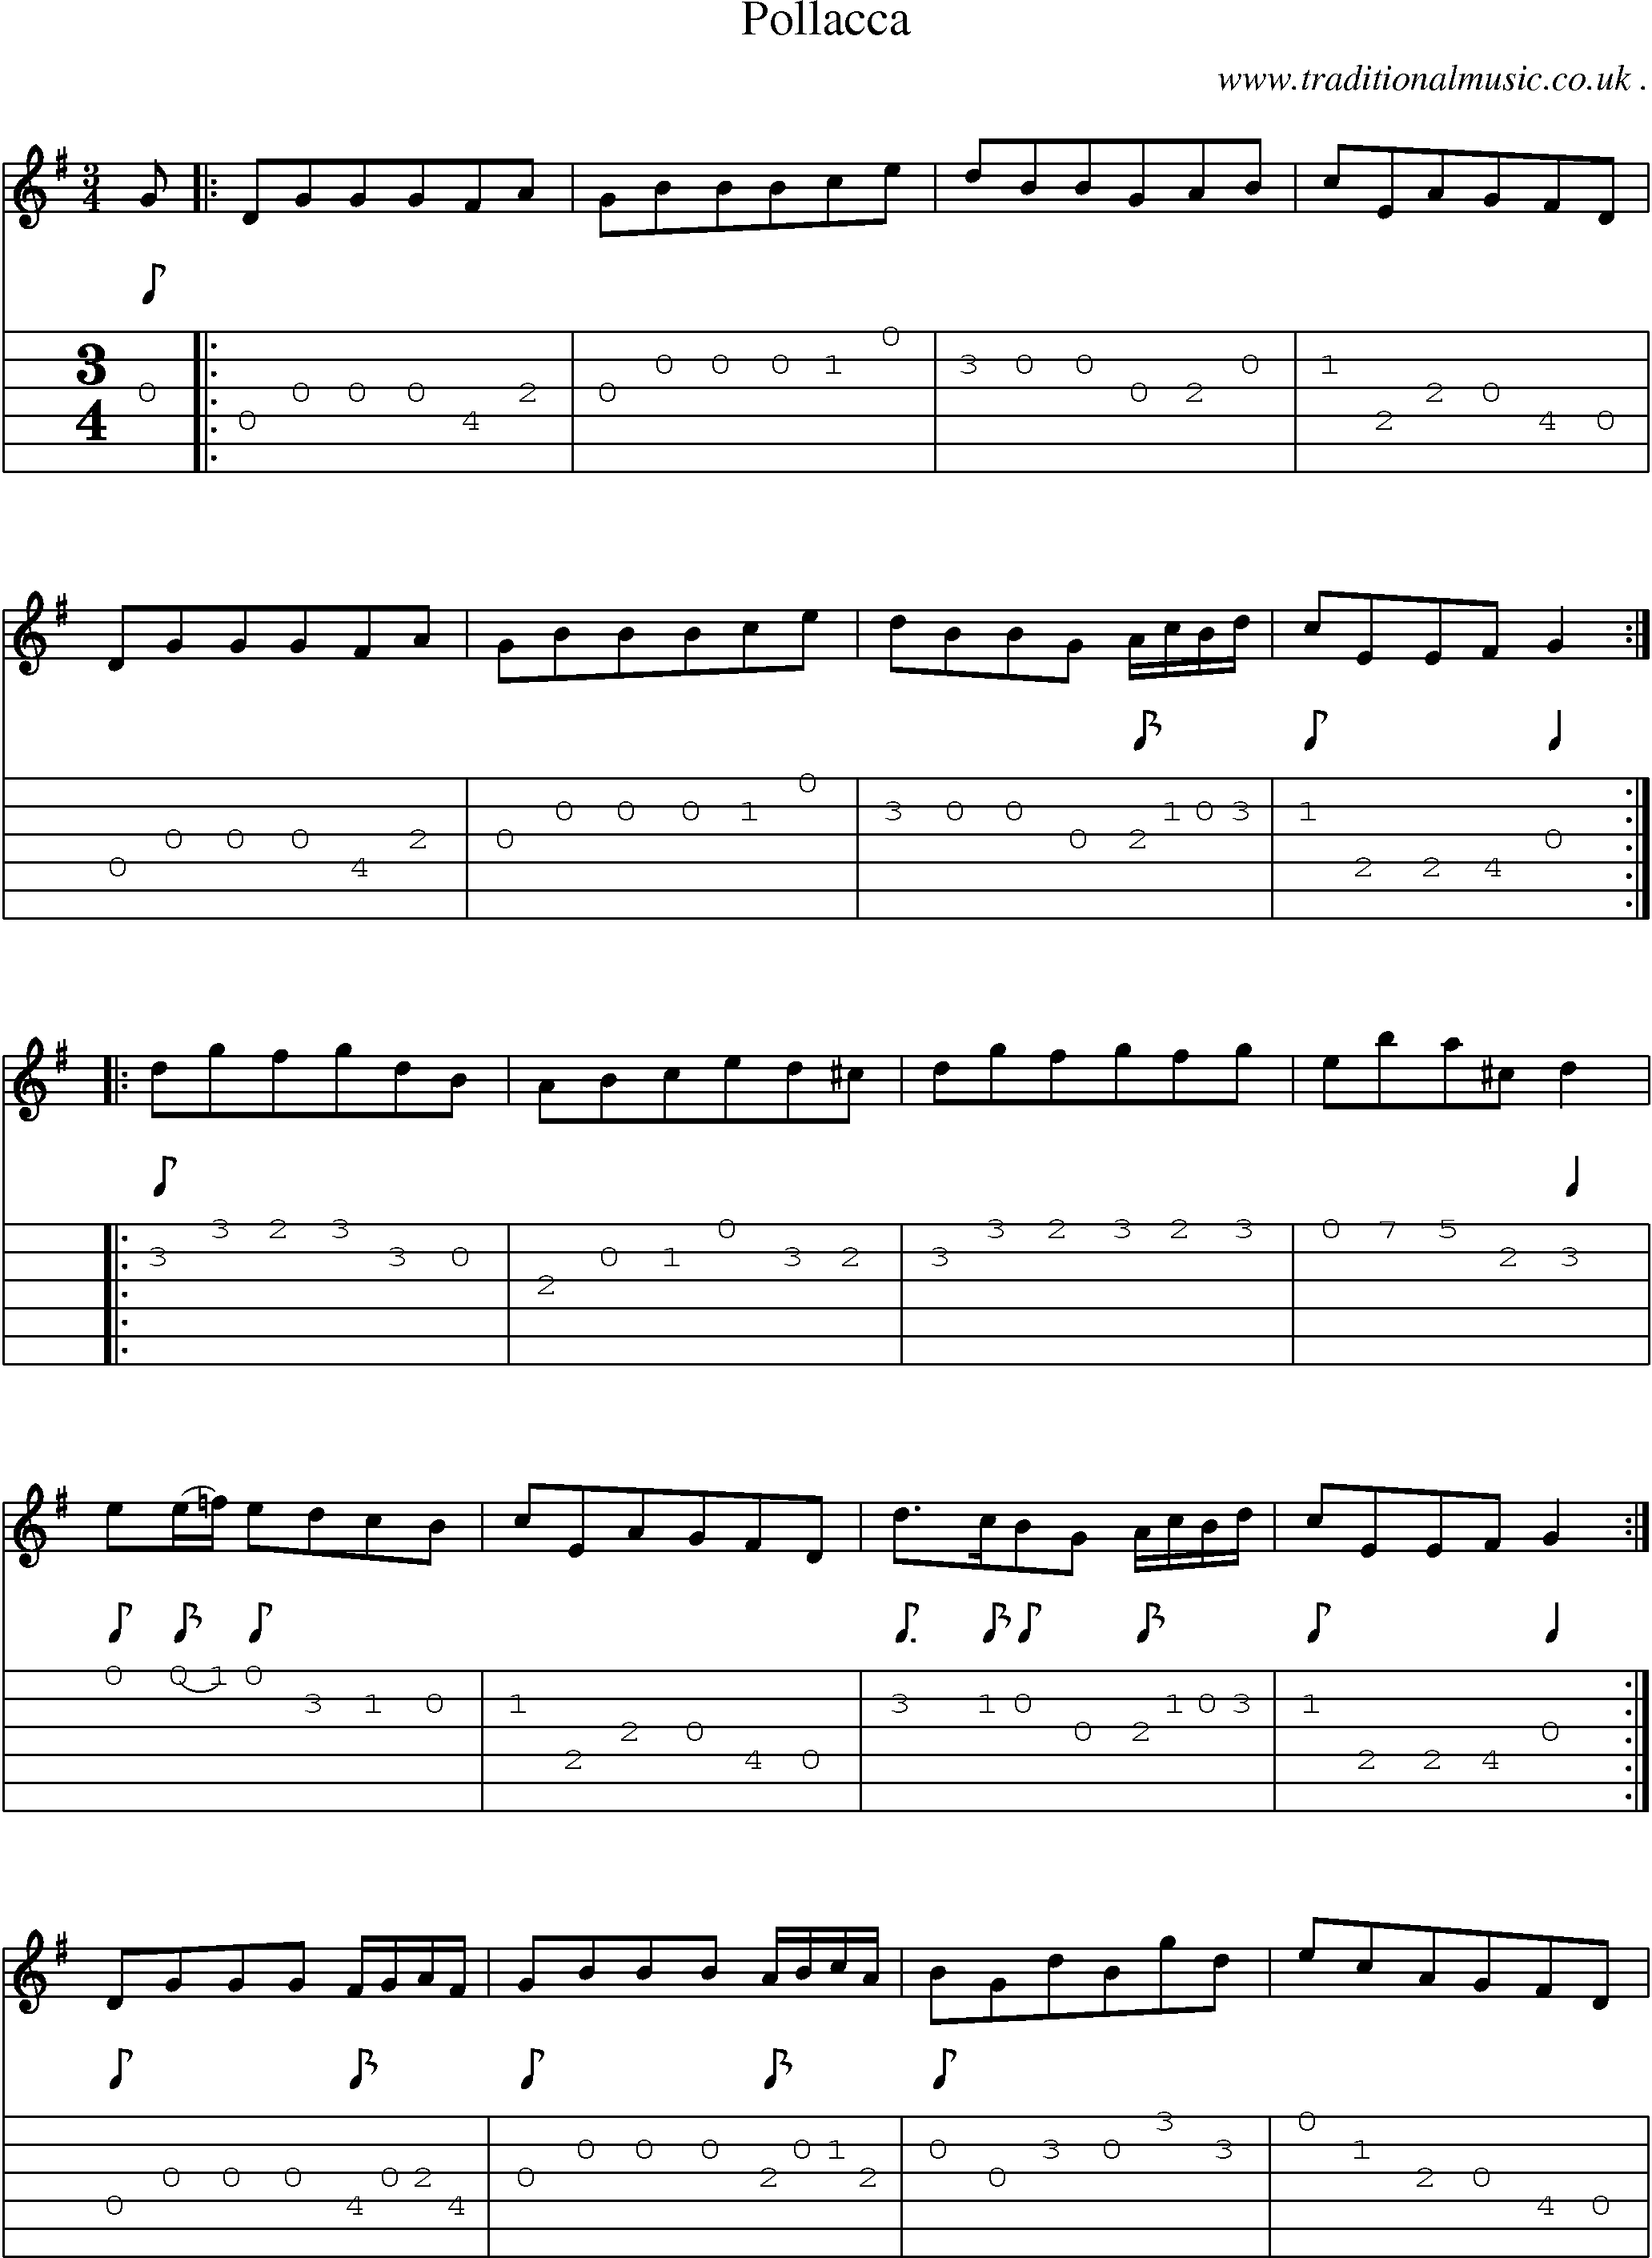 Sheet-Music and Guitar Tabs for Pollacca